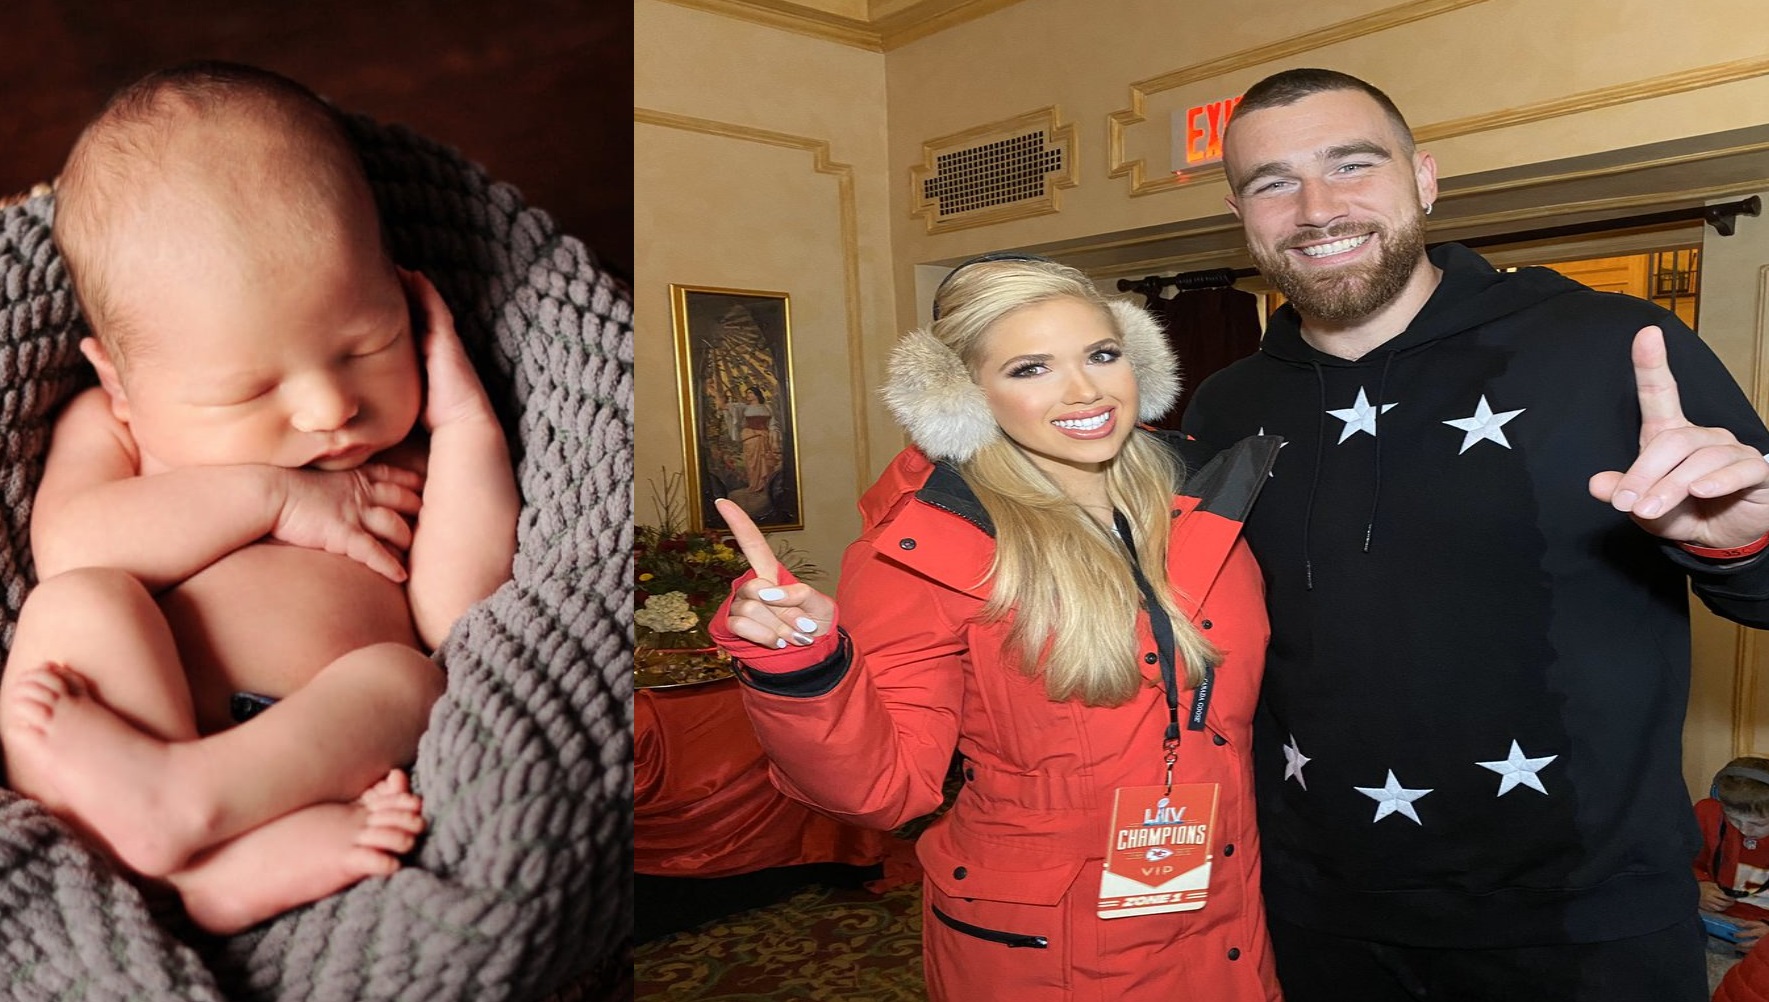 Breaking news: NFL sensation Travis Kelce leaves fans reeling with the unexpected announcement of his first child's birth, delivered by none other than Chiefs heiress Gracie Hunt!